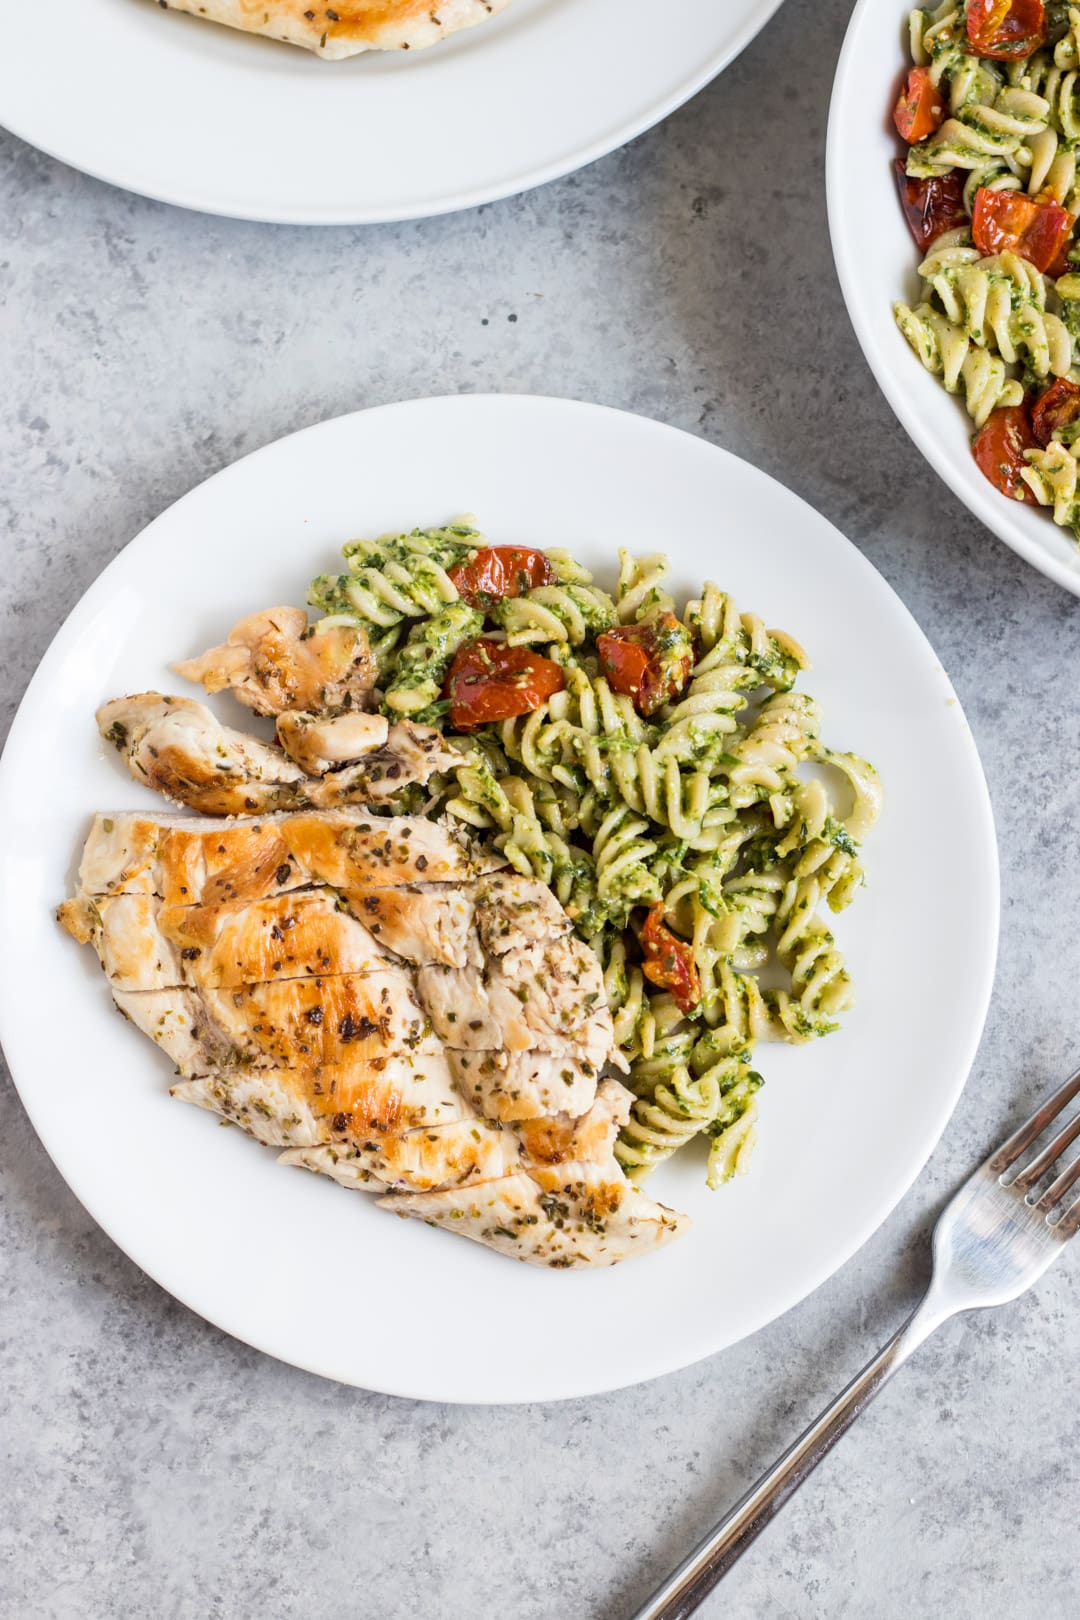 Looking down at a plate of Low FODMAP Pesto Pasta with Grilled Chicken and Roasted Tomatoes